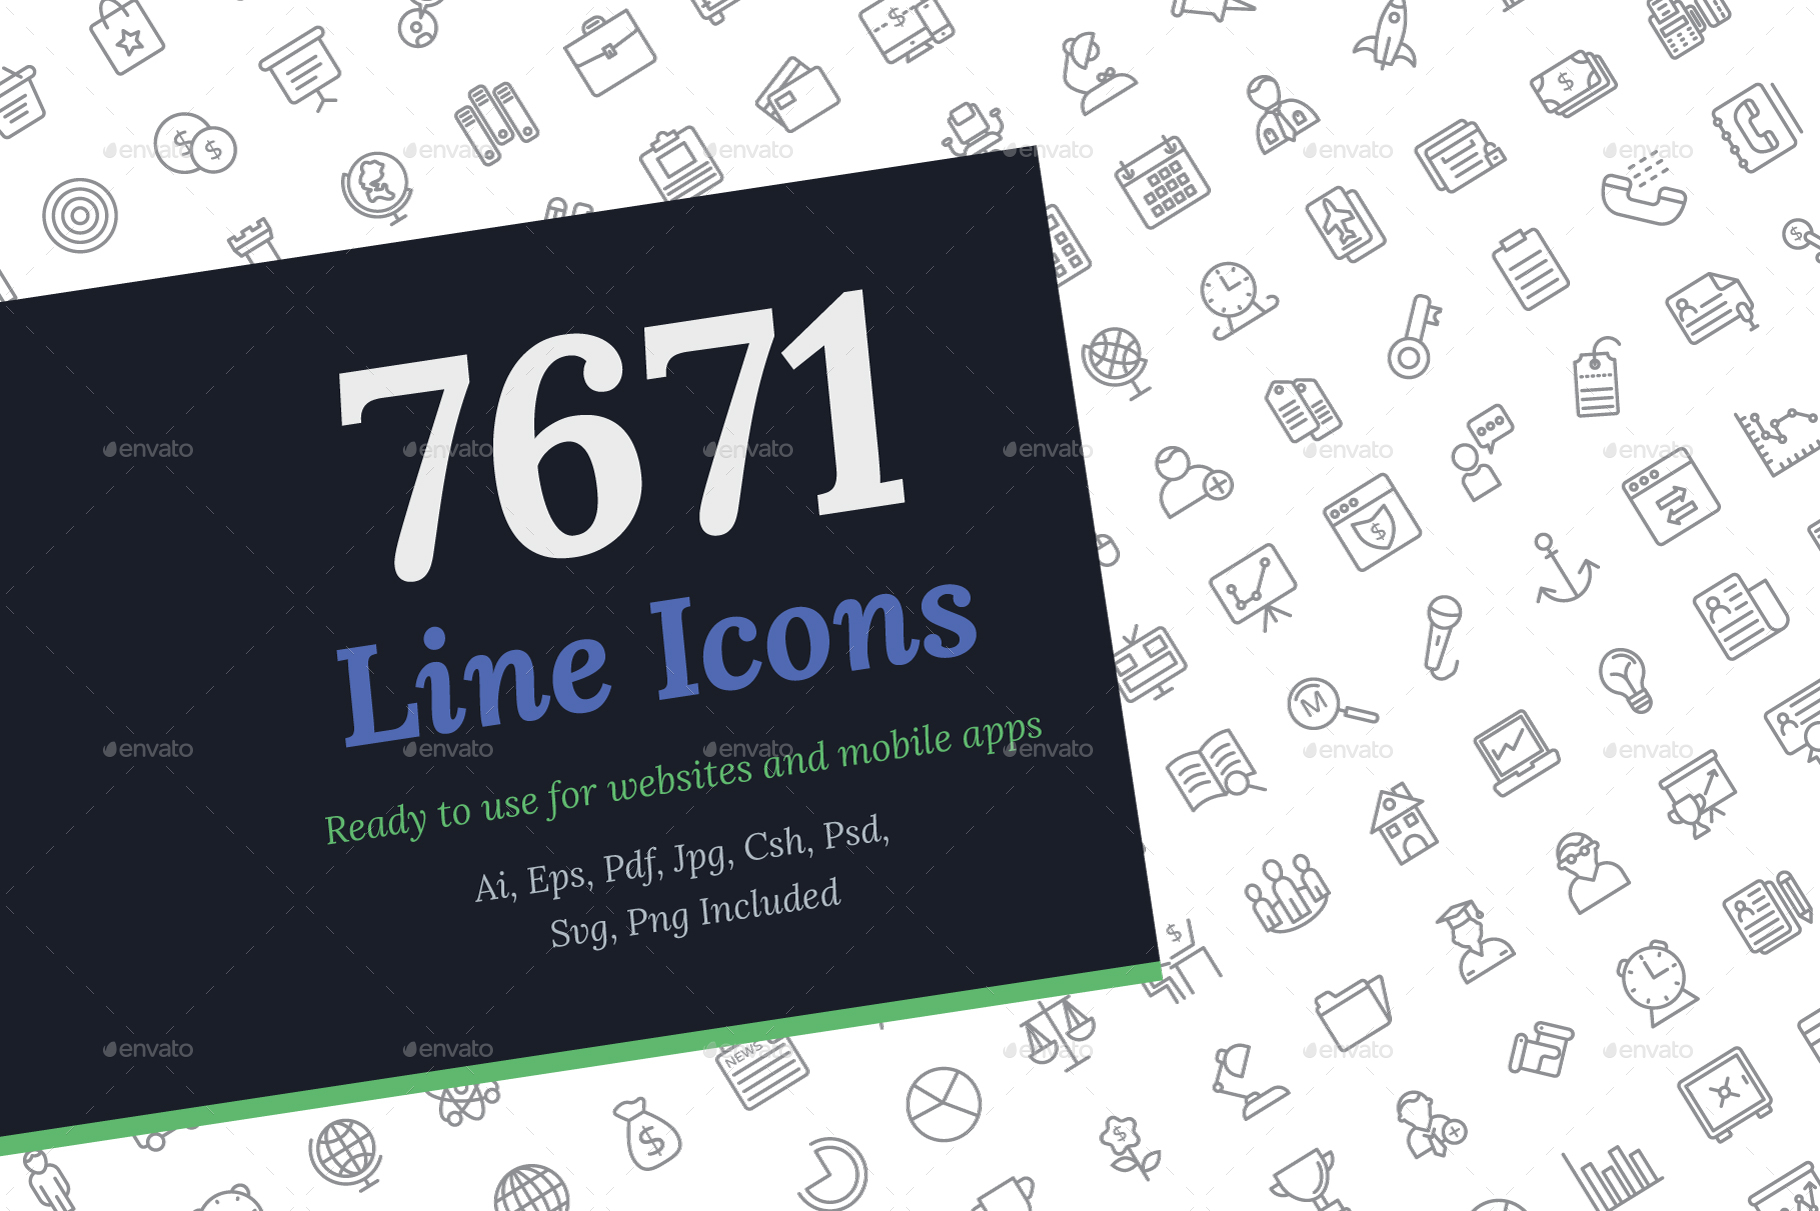 7671 Line Icons in Web Icons - product preview 1